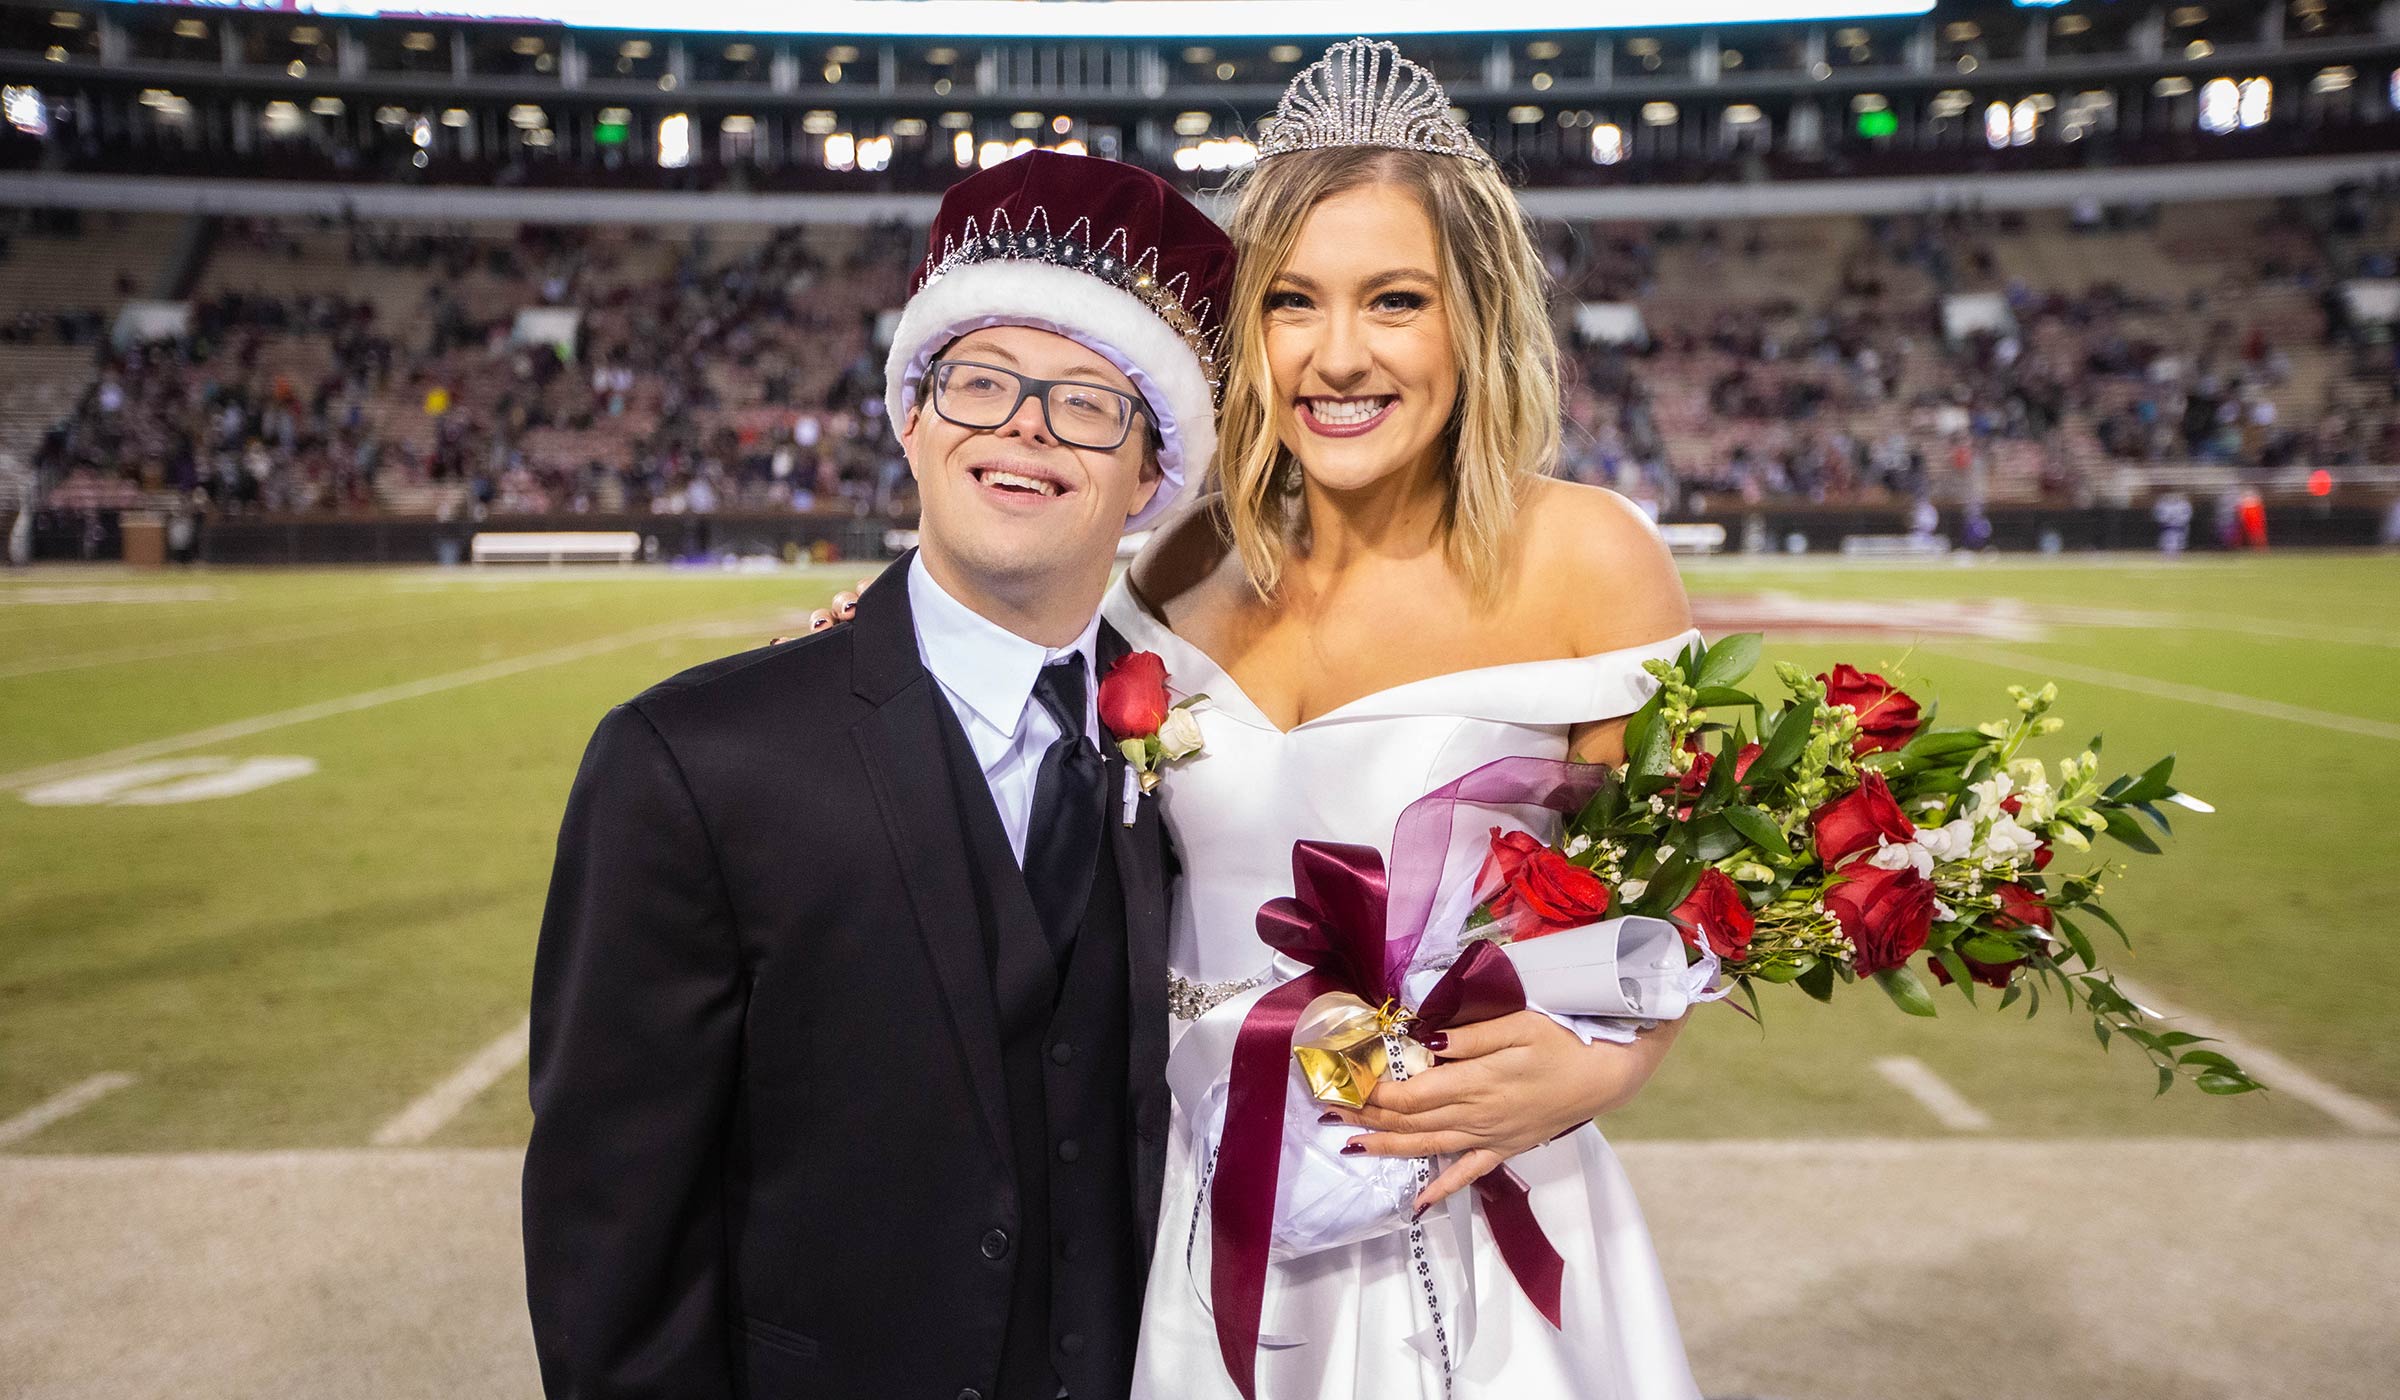 Male in black suit and maroon crown with female in white gown and tiara on sideline of football field.